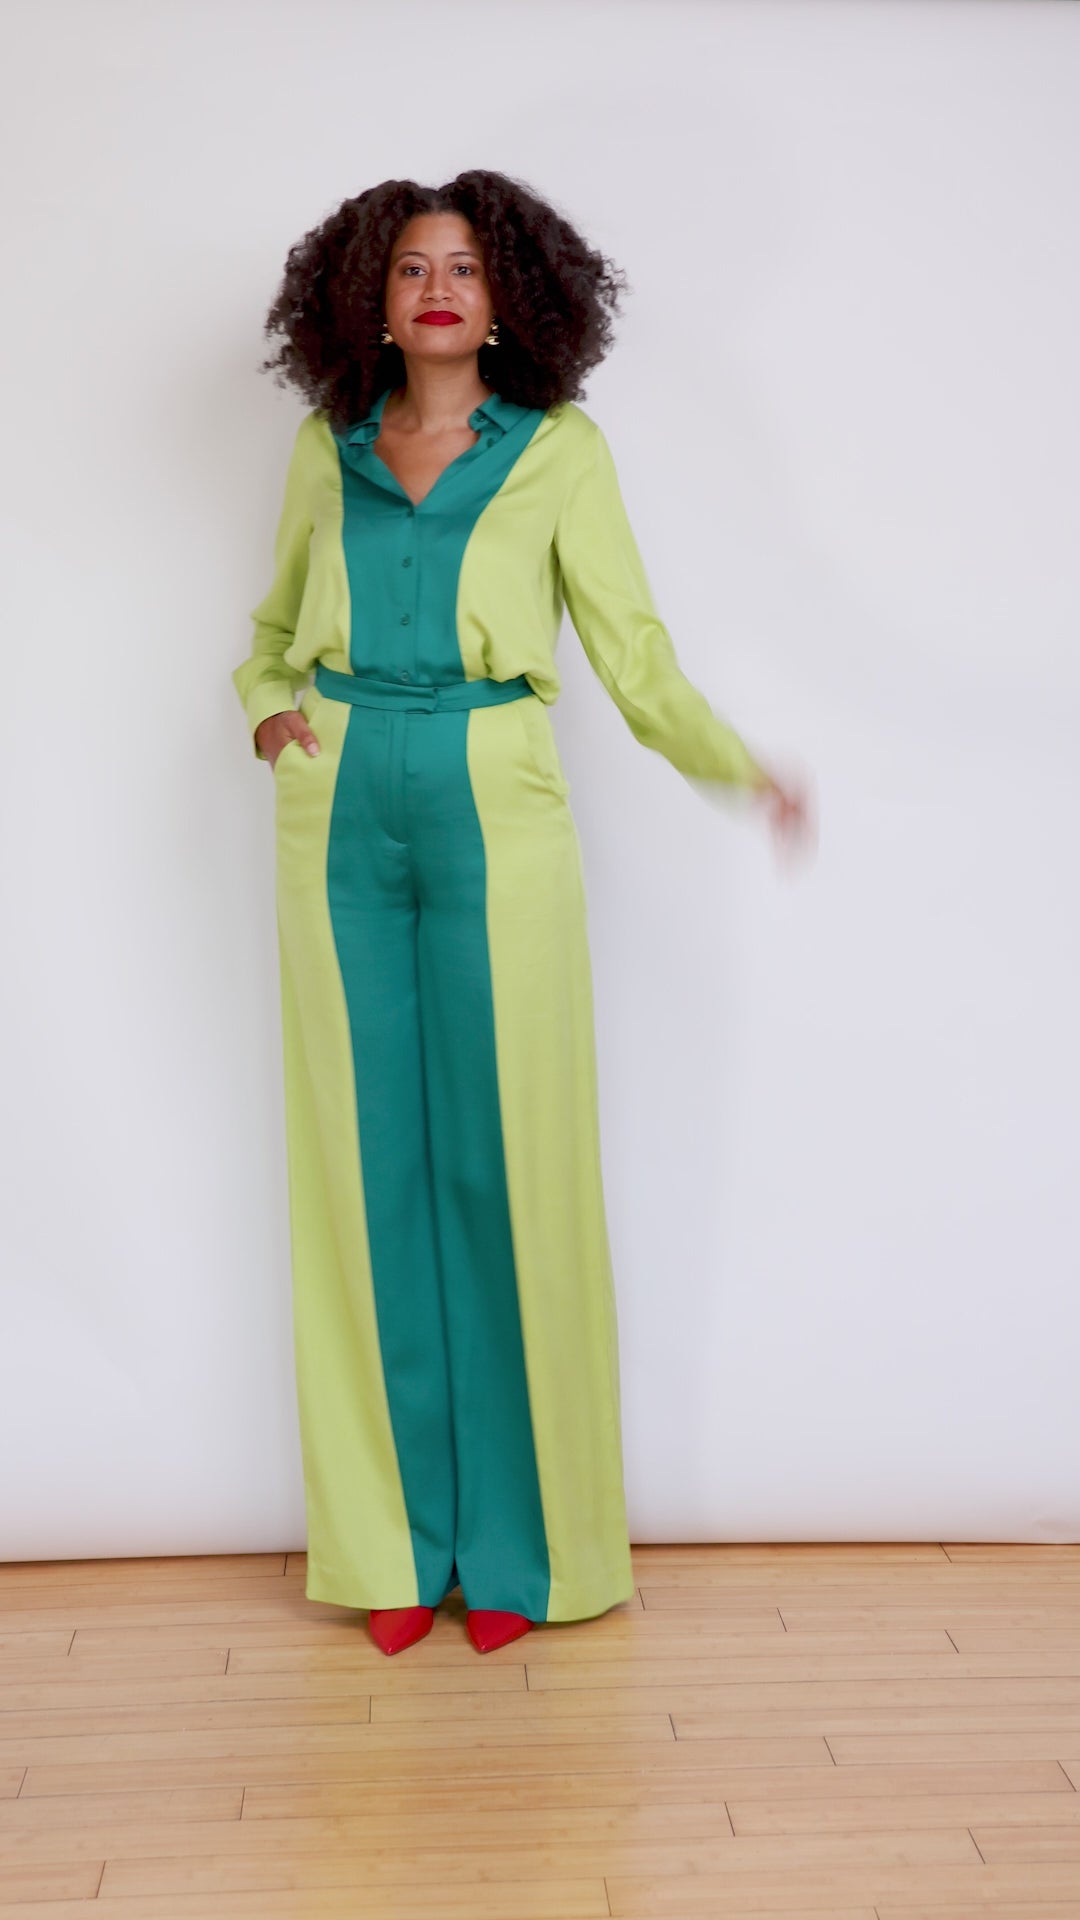 London Two-Tone Wide Leg Pants feature colorblocking of jungle green and chartreuse worn with matching shirt for a modern workwear set.